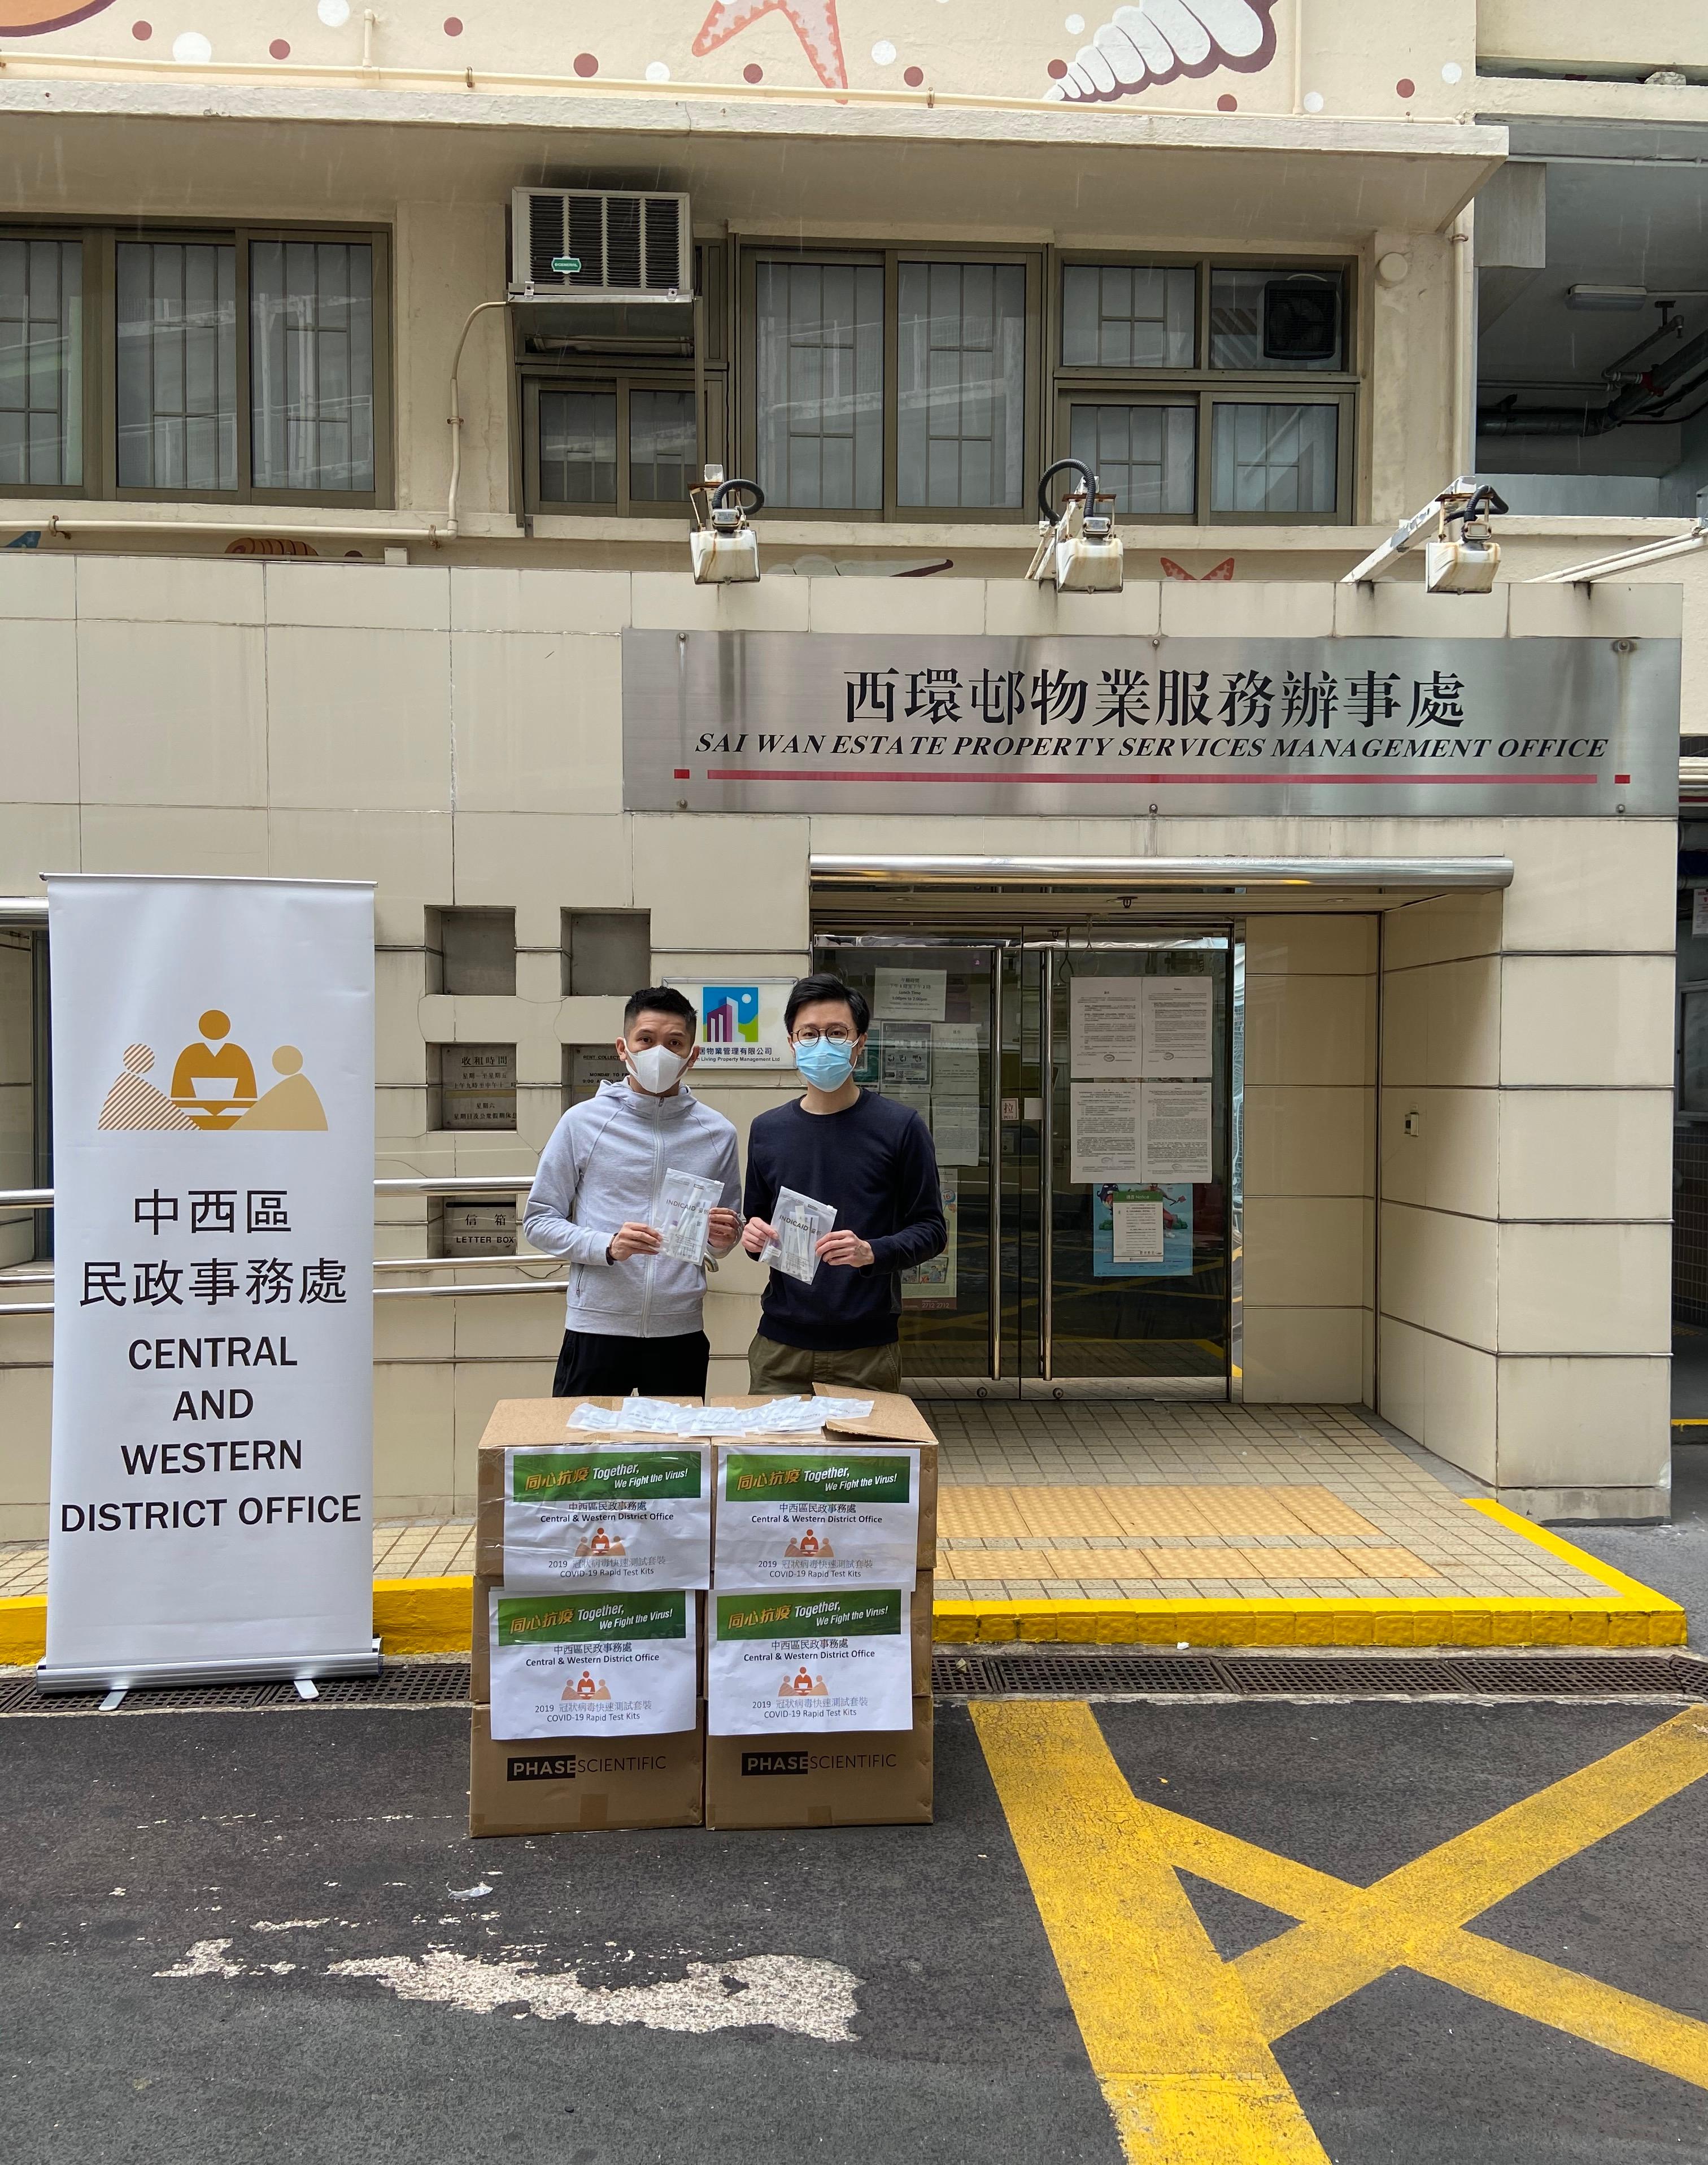 The Central and Western District Office today (March 16) distributed COVID-19 rapid test kits to households, cleansing workers and property management staff living and working in Sai Wan Estate for voluntary testing through the Housing Department.